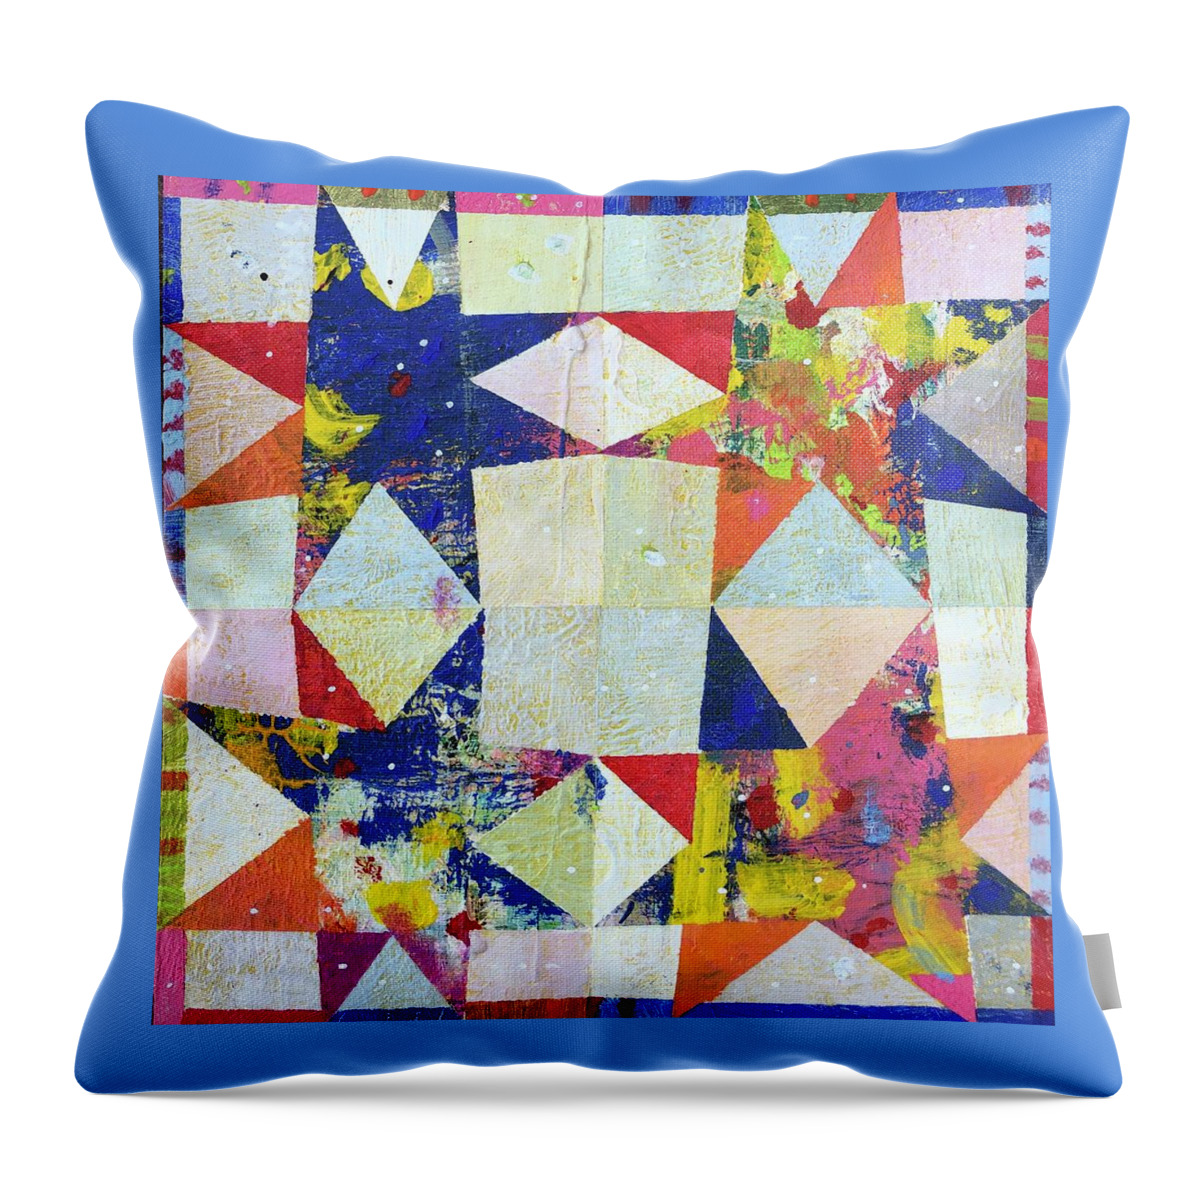 Stars Throw Pillow featuring the painting Uno, Dos, Tres, Cuatro by Cyndie Katz